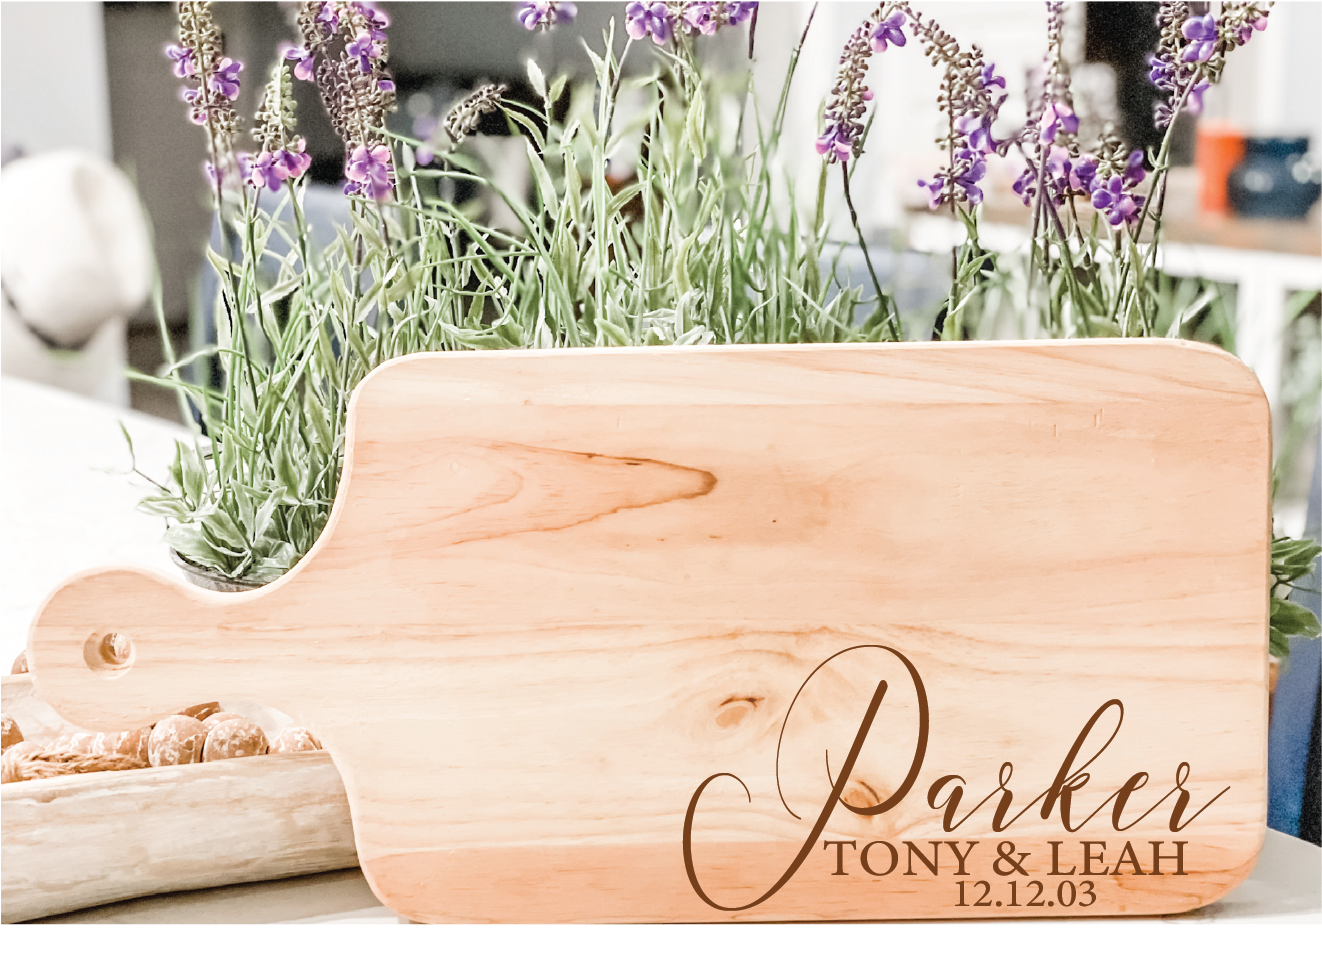 Charcuterie and Boards Workshops - Paisley Grace Makery